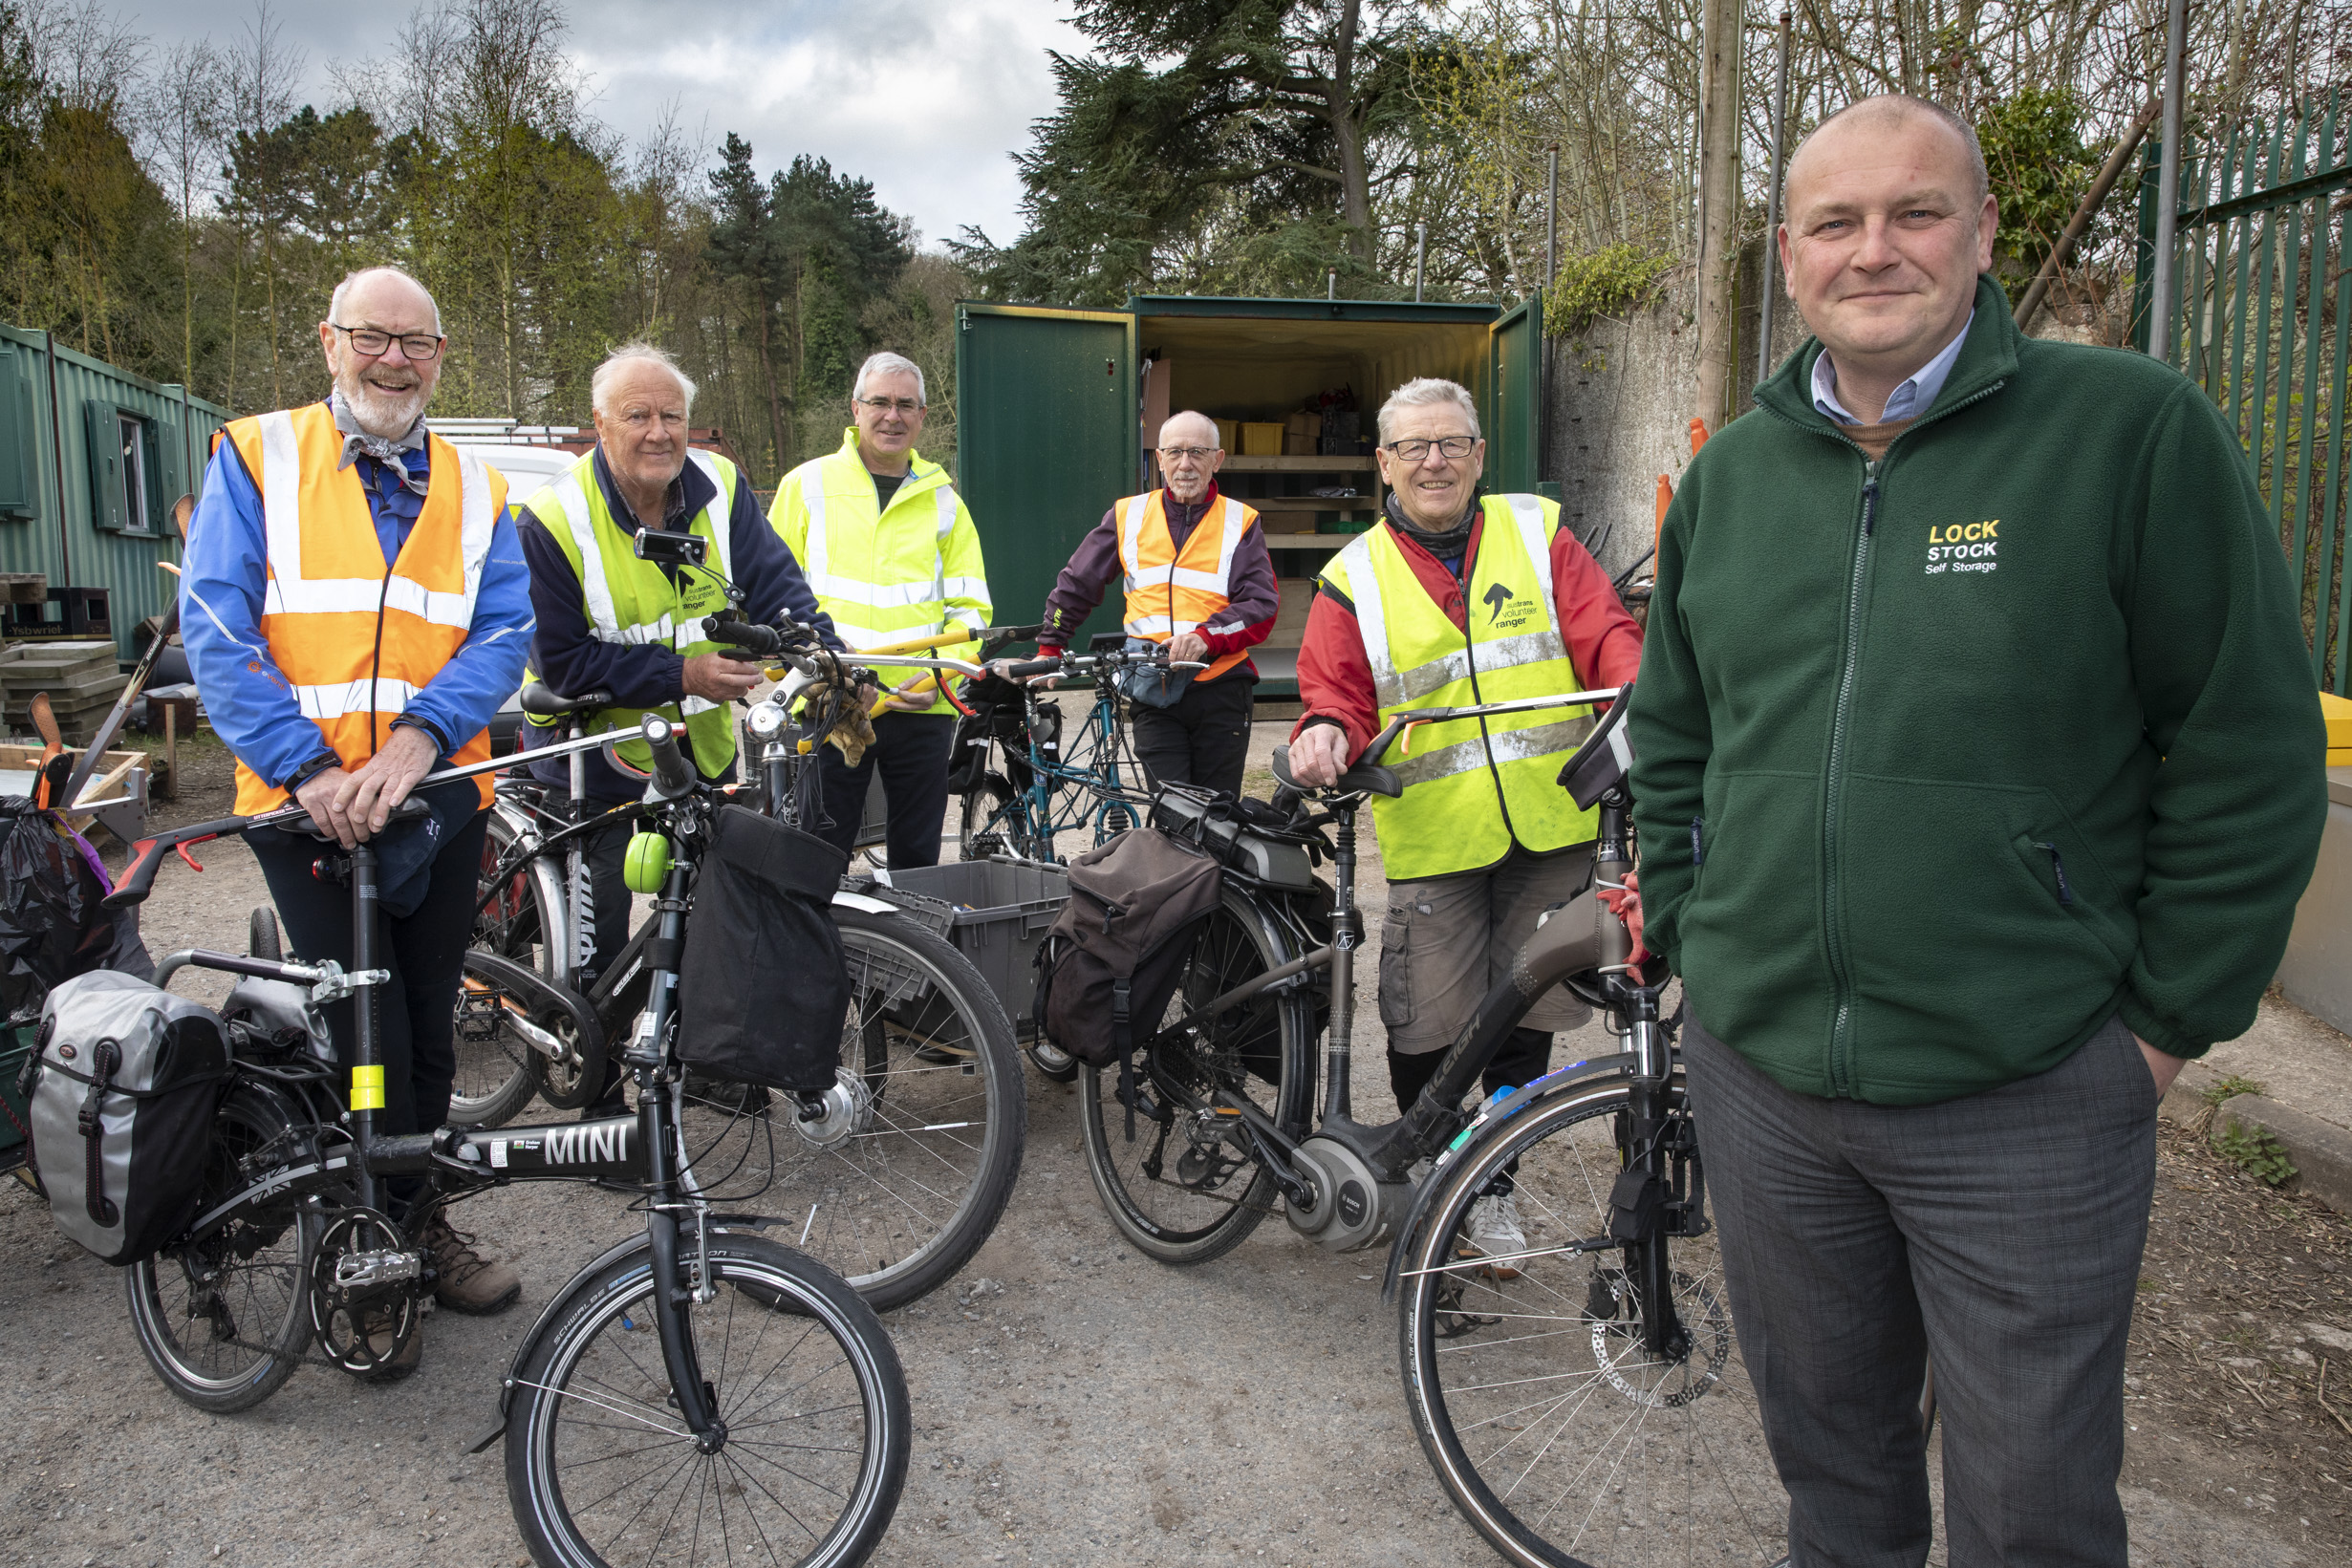 Dedicated band of volunteers keeping local cycle paths open